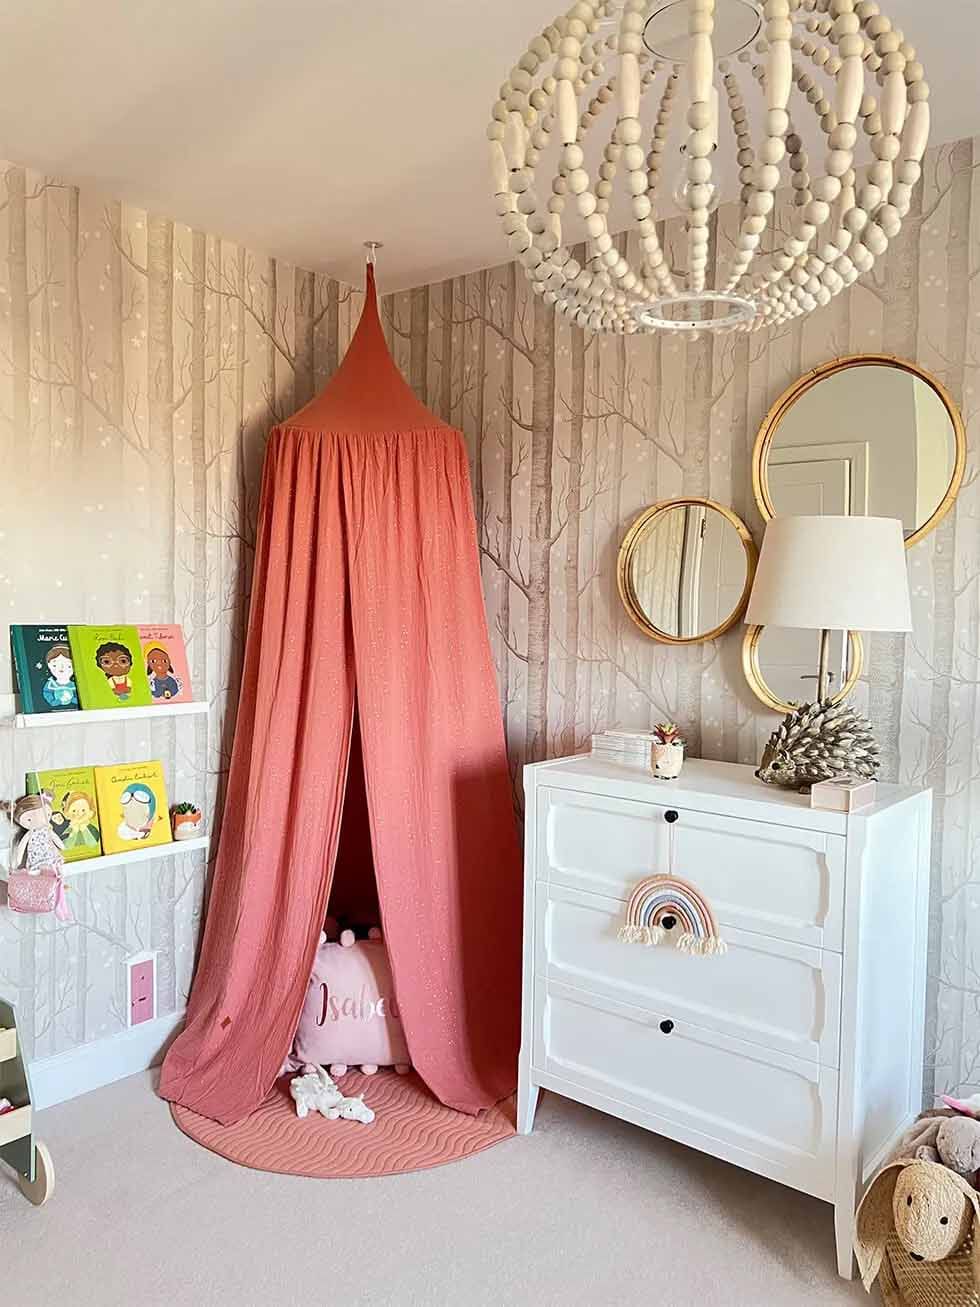 Kids fairytale themed bedroom with pink canopy and wallpaper